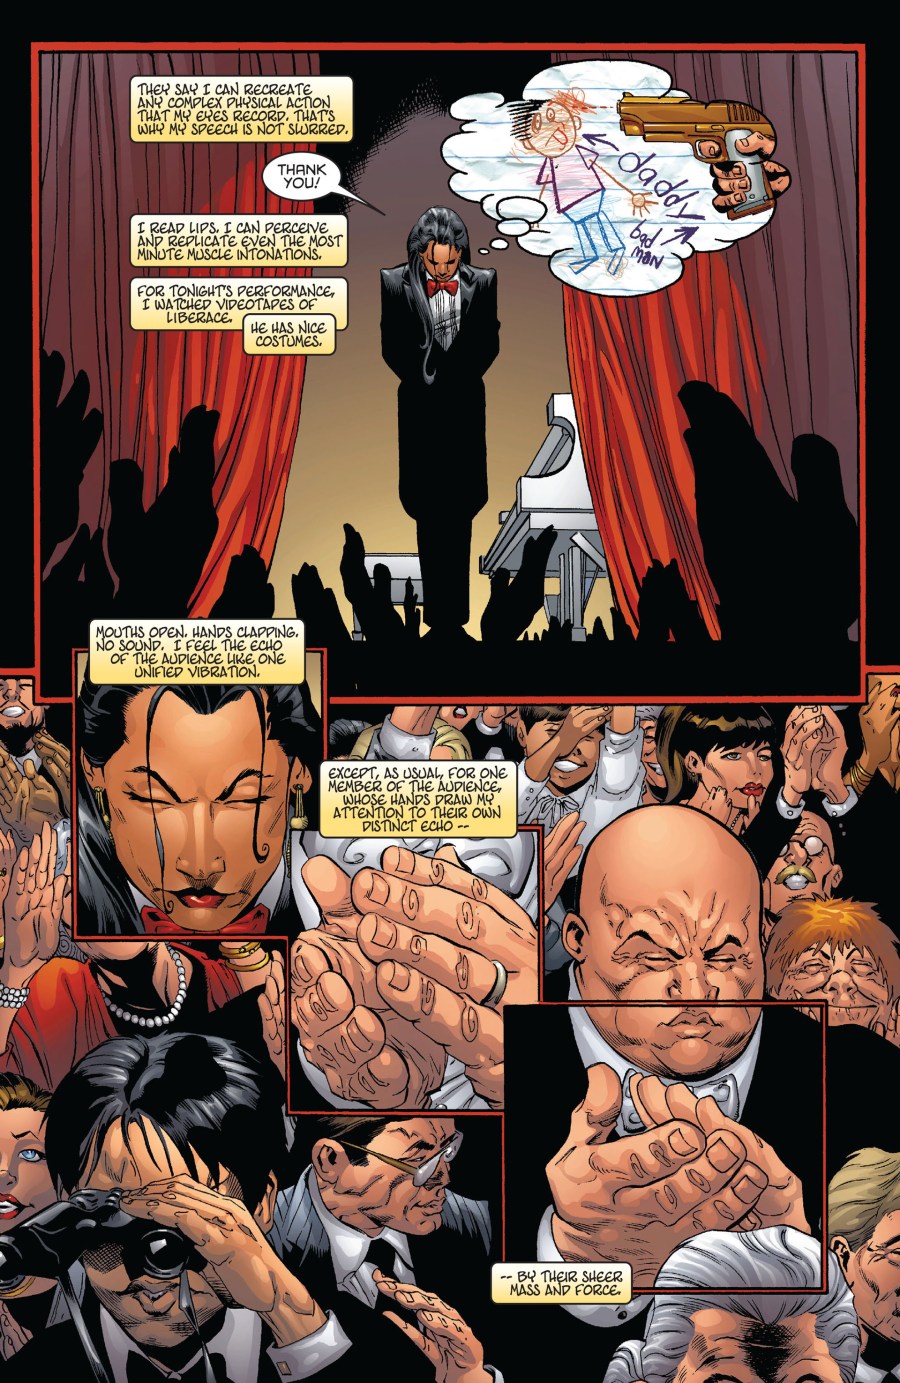 Maya Lopez takes the stage for the first time in Daredevil Vol. 2 #9 "Murdock's Law" (1999), Marvel Comics. Words by DAvid Mack, art by Joe Quesada, Jimmy Palmiotti, Richard Isanove, and Richard Starkings.